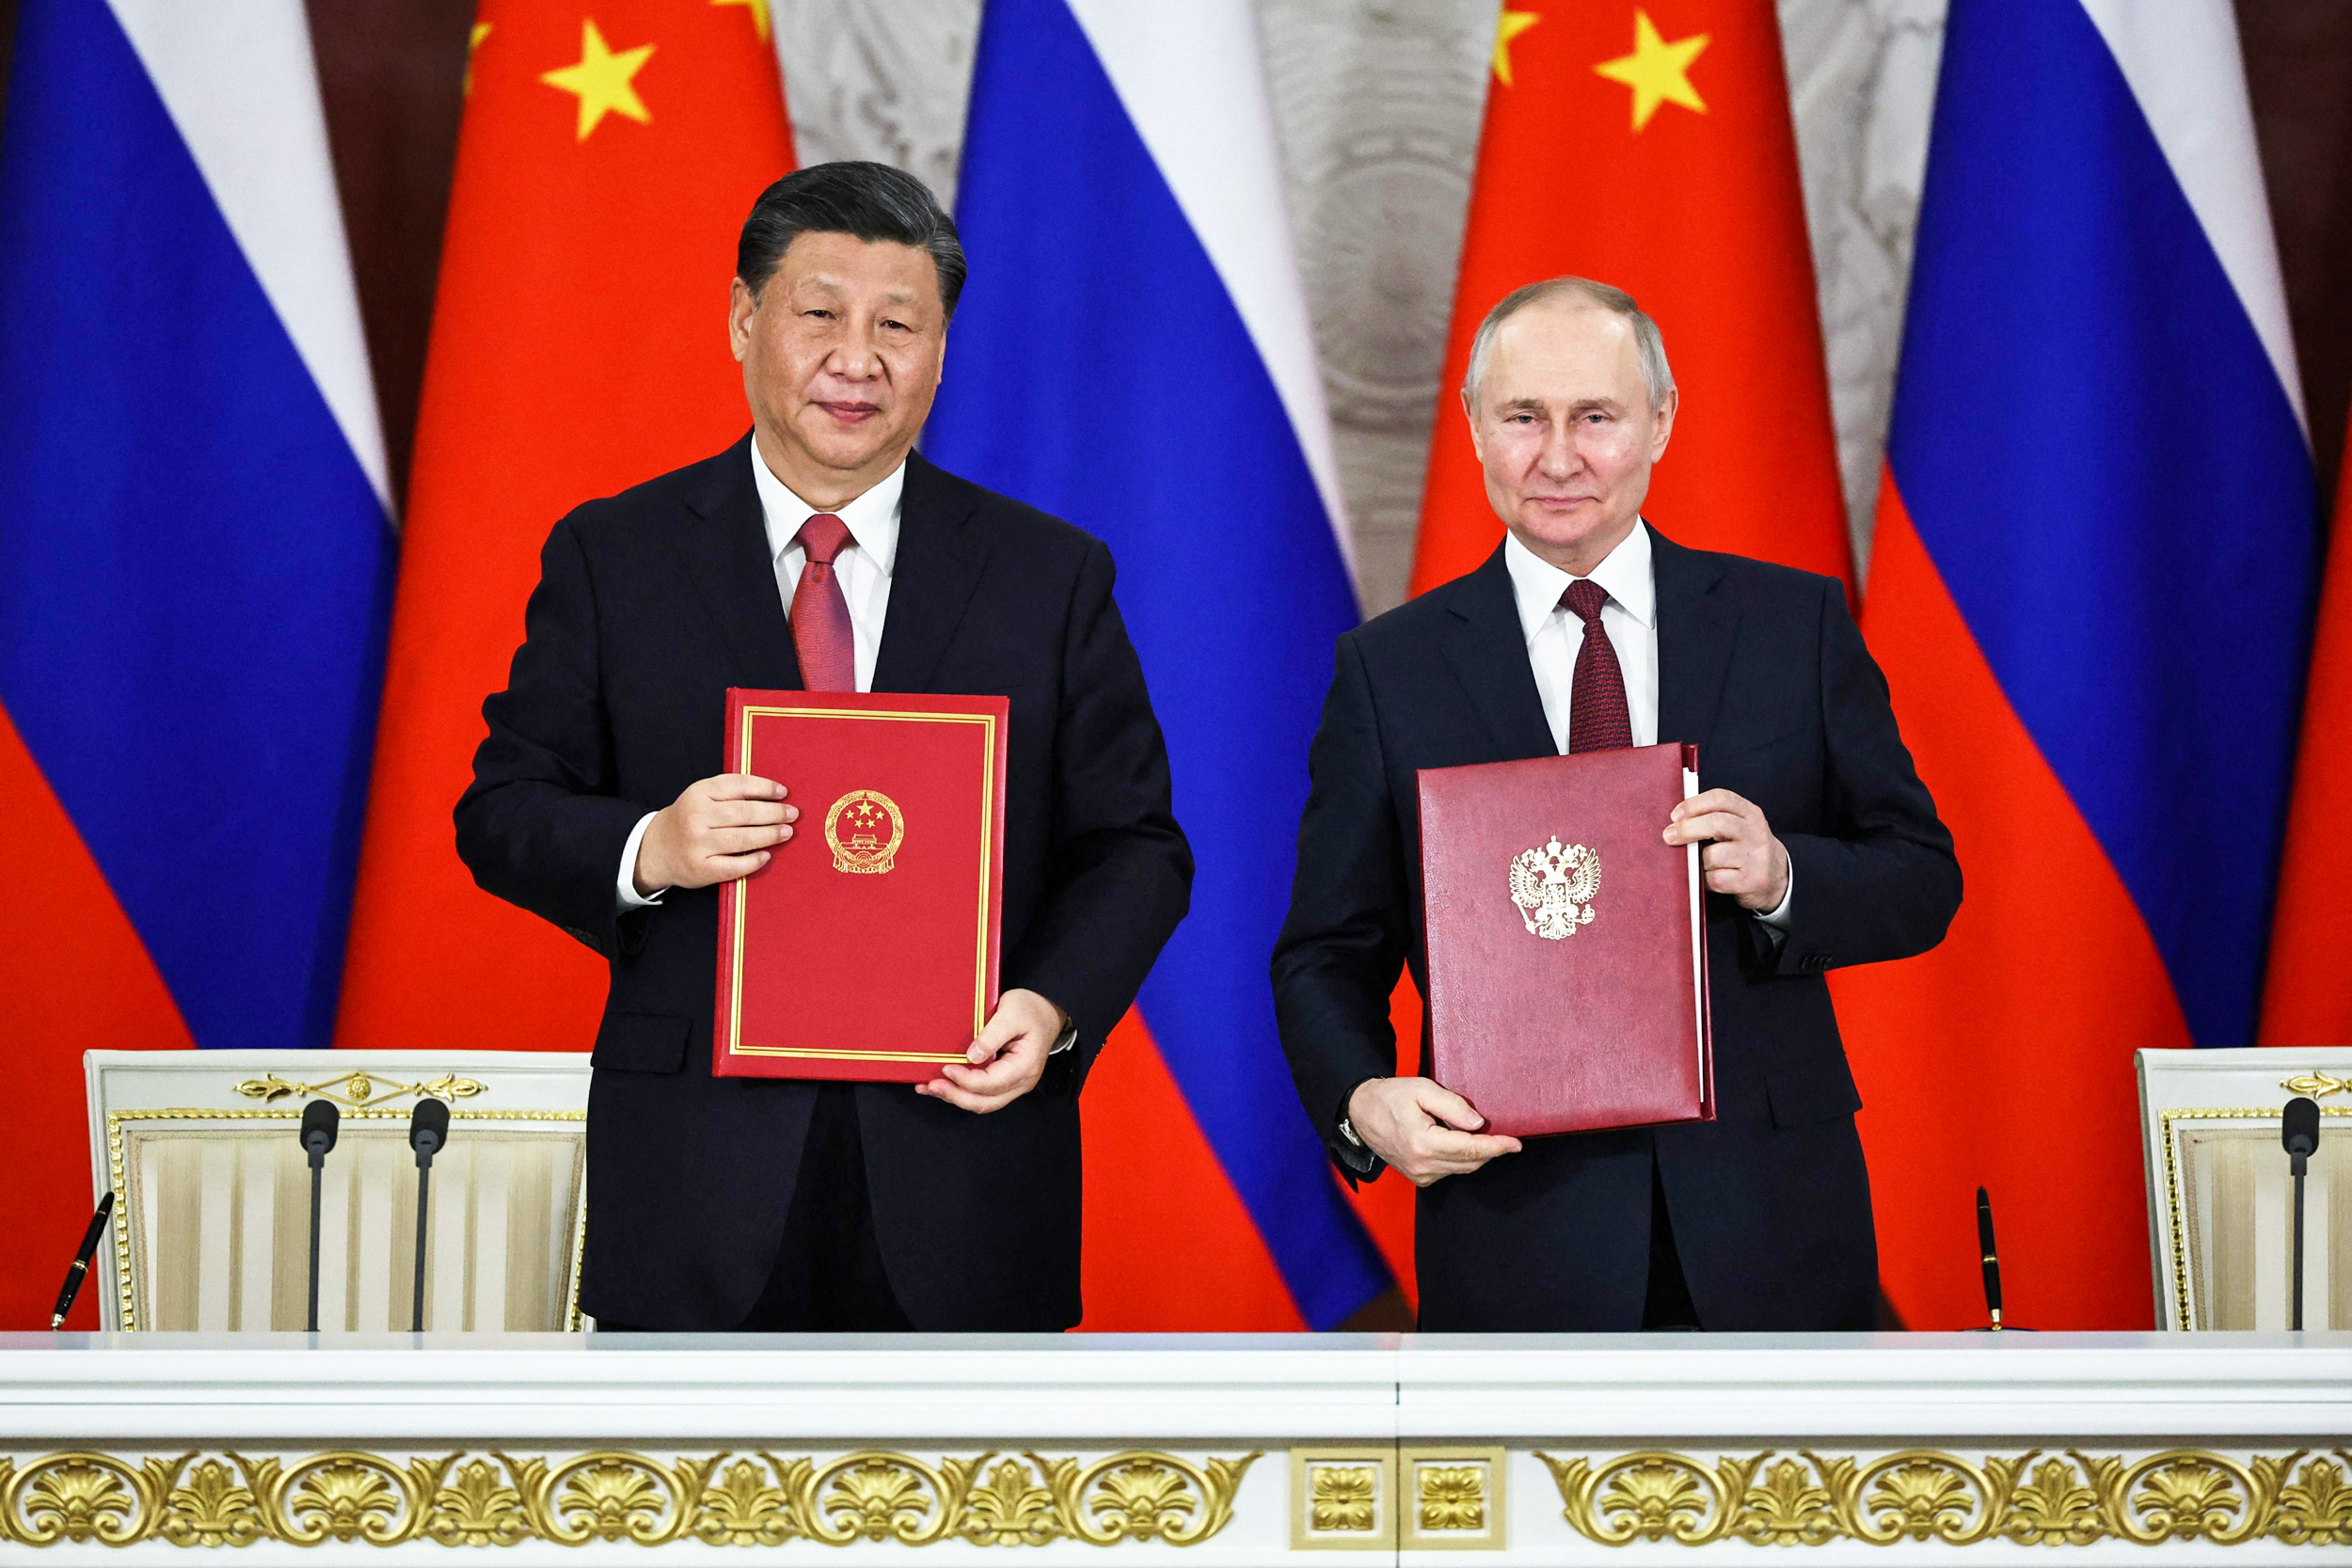 Xi Putin friendship is forced and temporary: USA